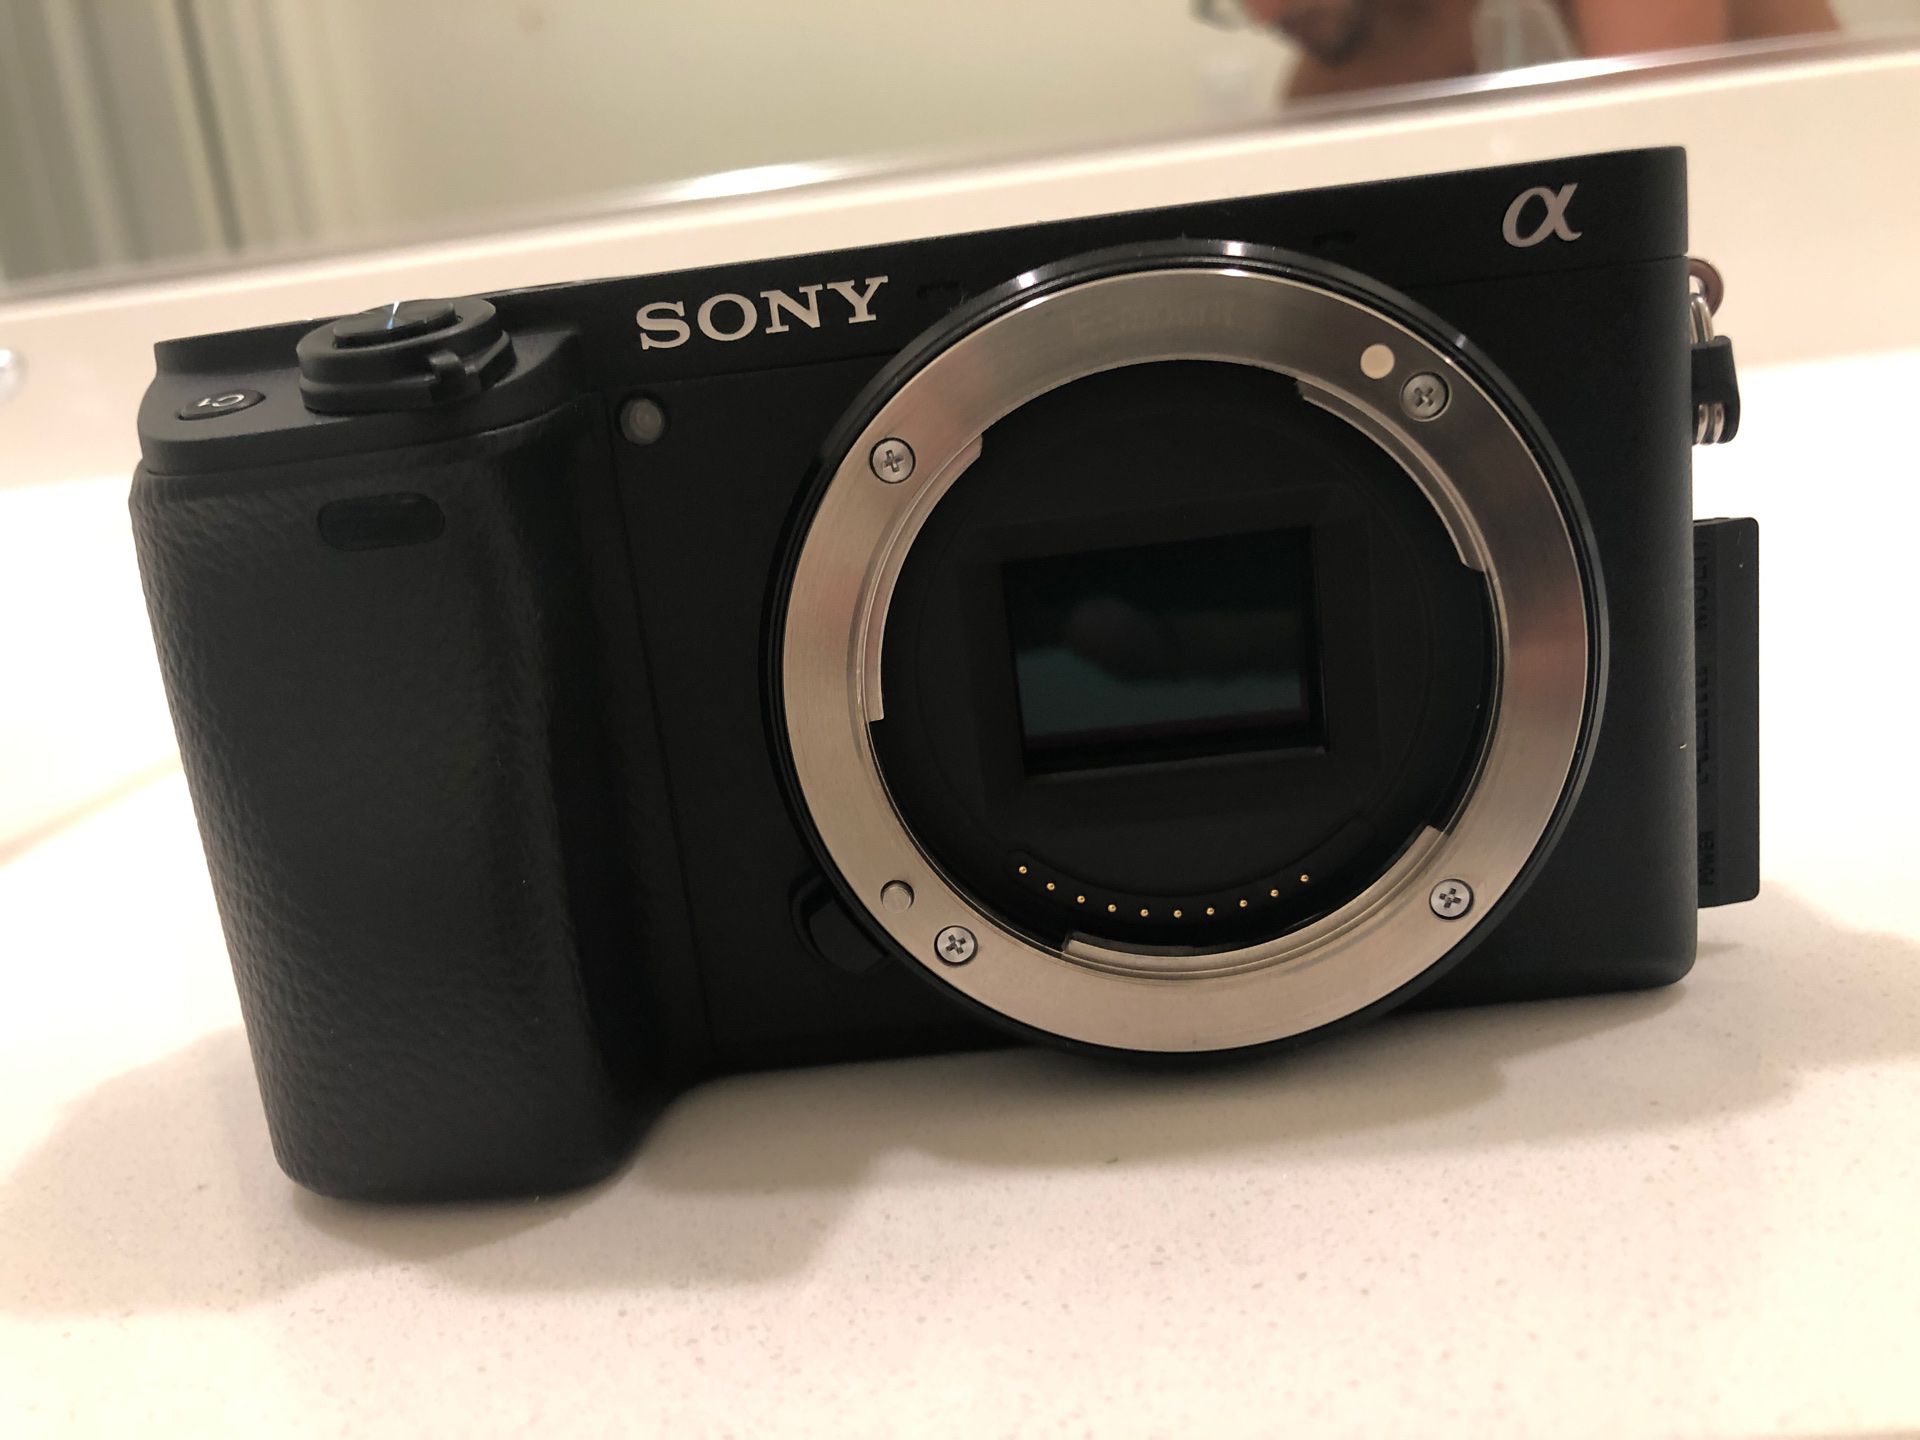 Sony a6400 brand new - price negotiable (body only)